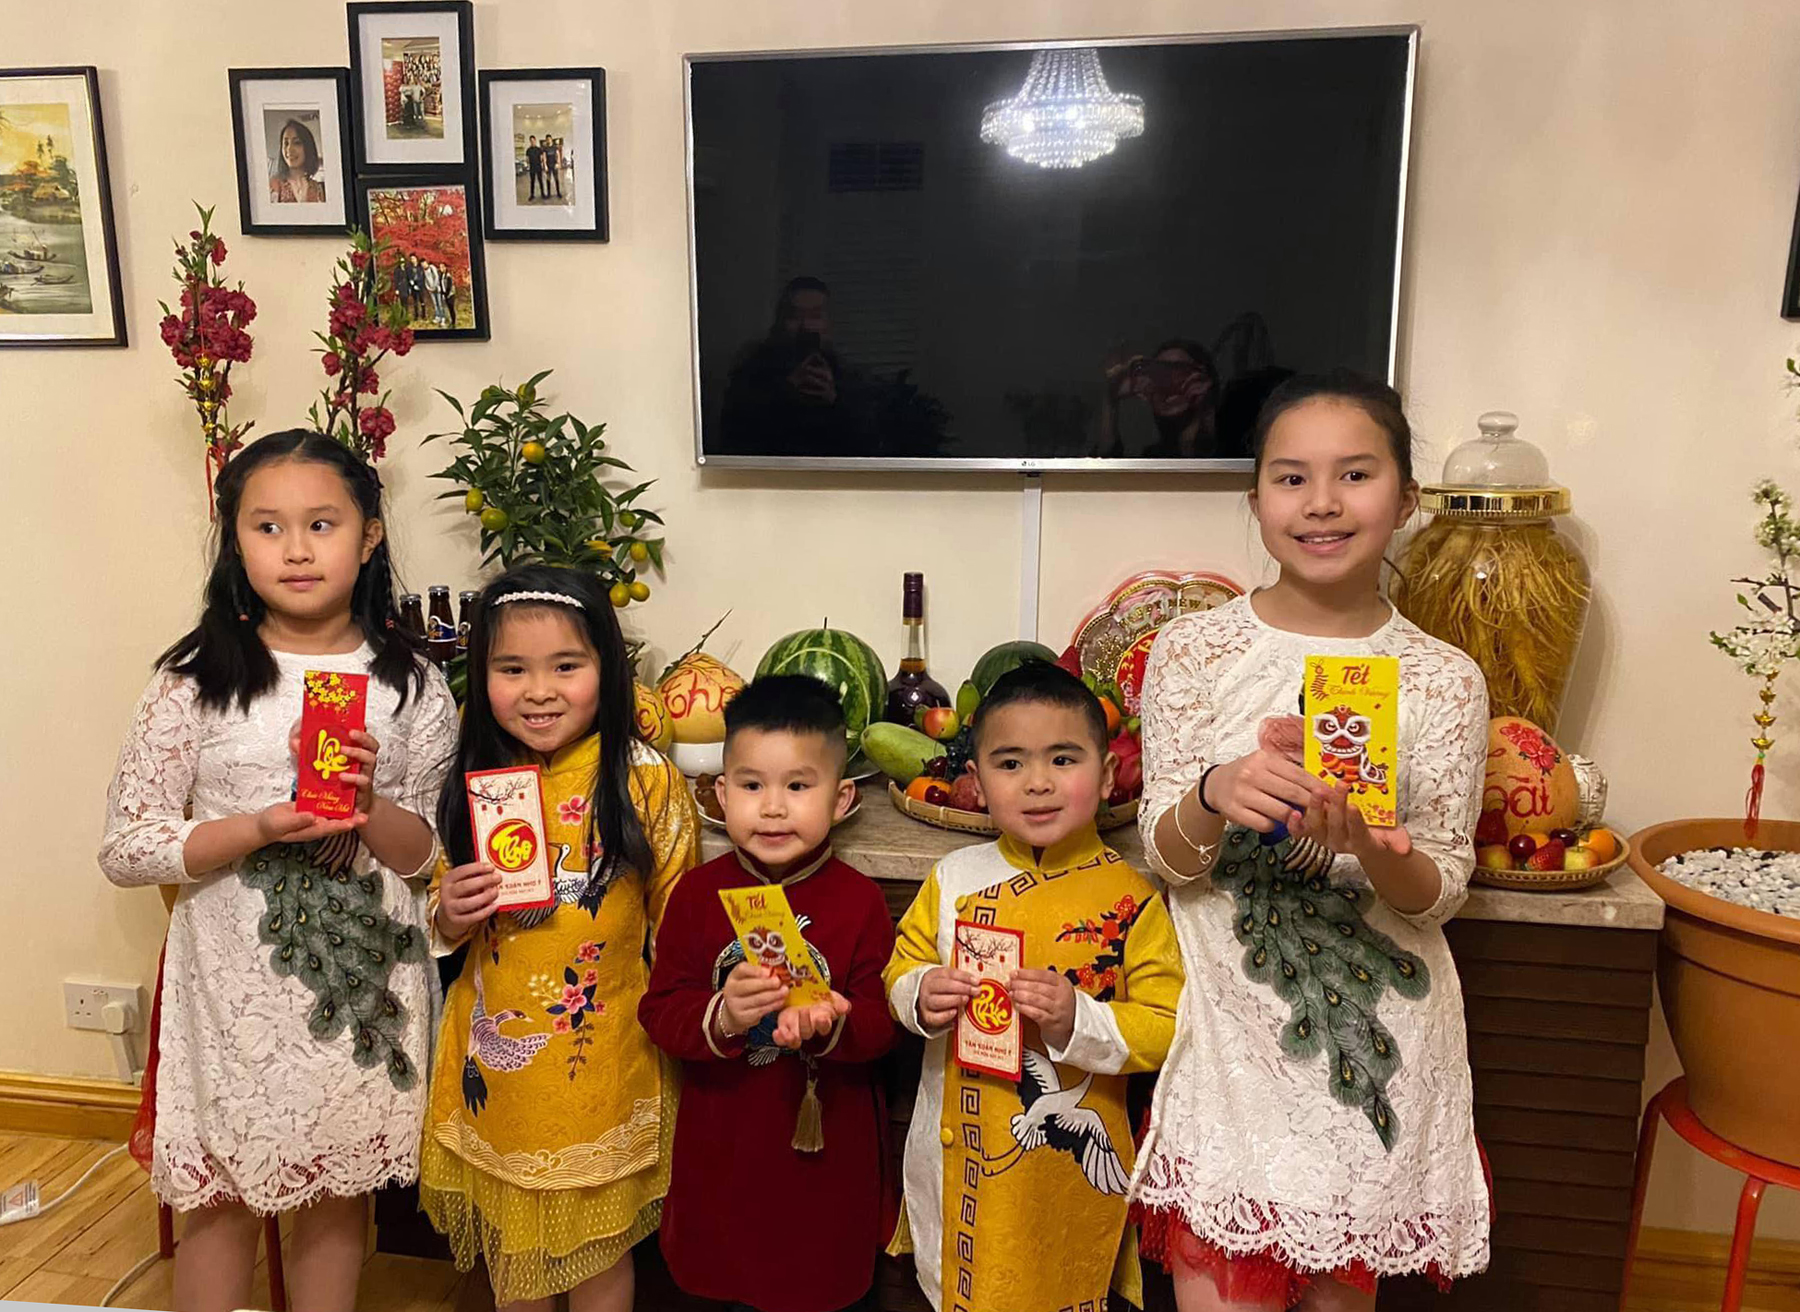 Children from Vinh Le and his friends families in the U.K. pose for a photo in Vietnamese traditional dress and with Tet lucky money li xi. Photo courtesy of Vinh Le